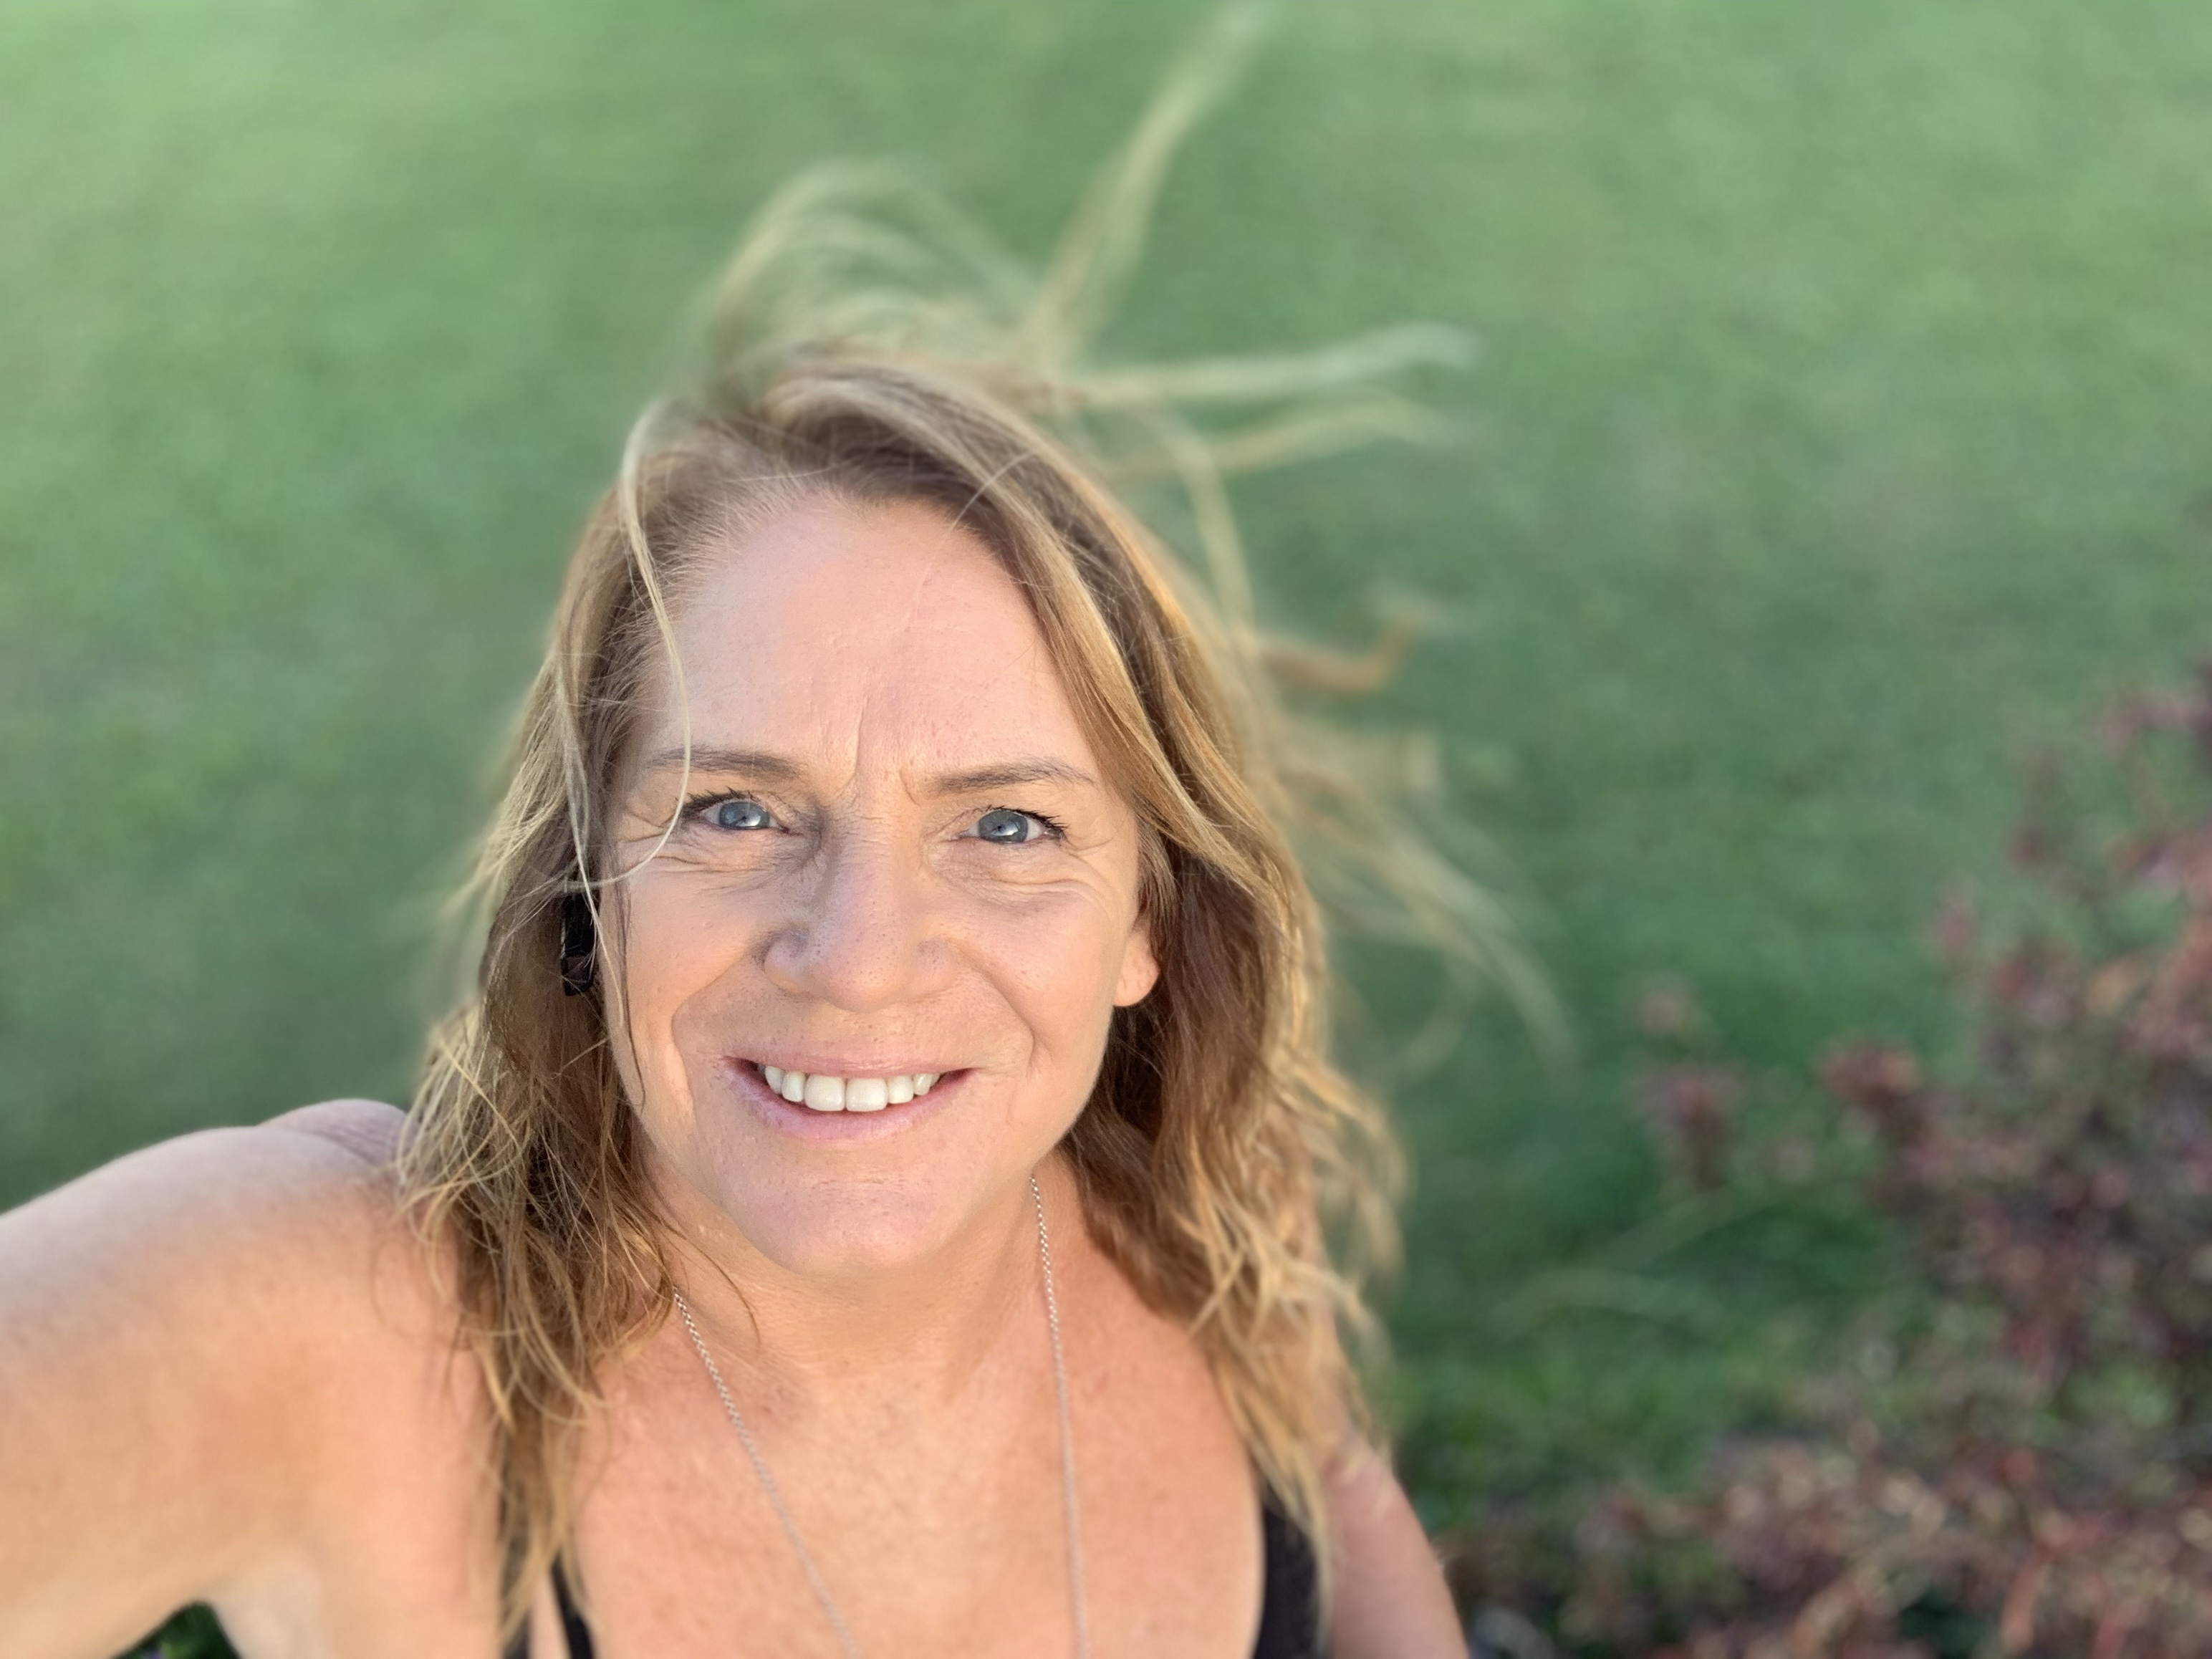 Woman grinning into camera in grass